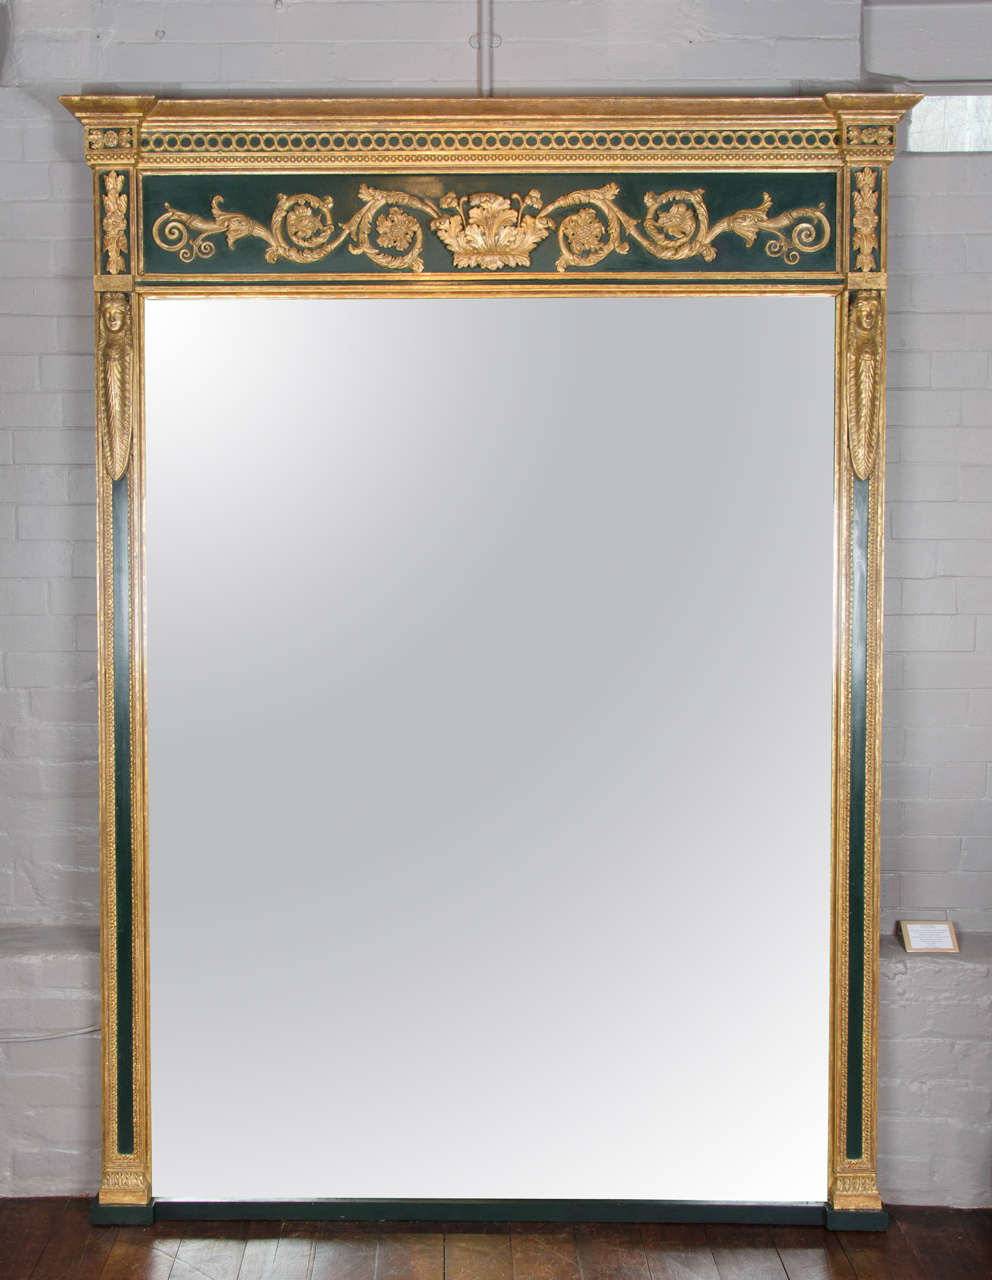 A rare early 19th century carved, painted and gilt wood mirror of large proportions retaining its original plate.
The frame with caryatids to the sides and leaf and scroll decoration atop 
to designs by George Smith.